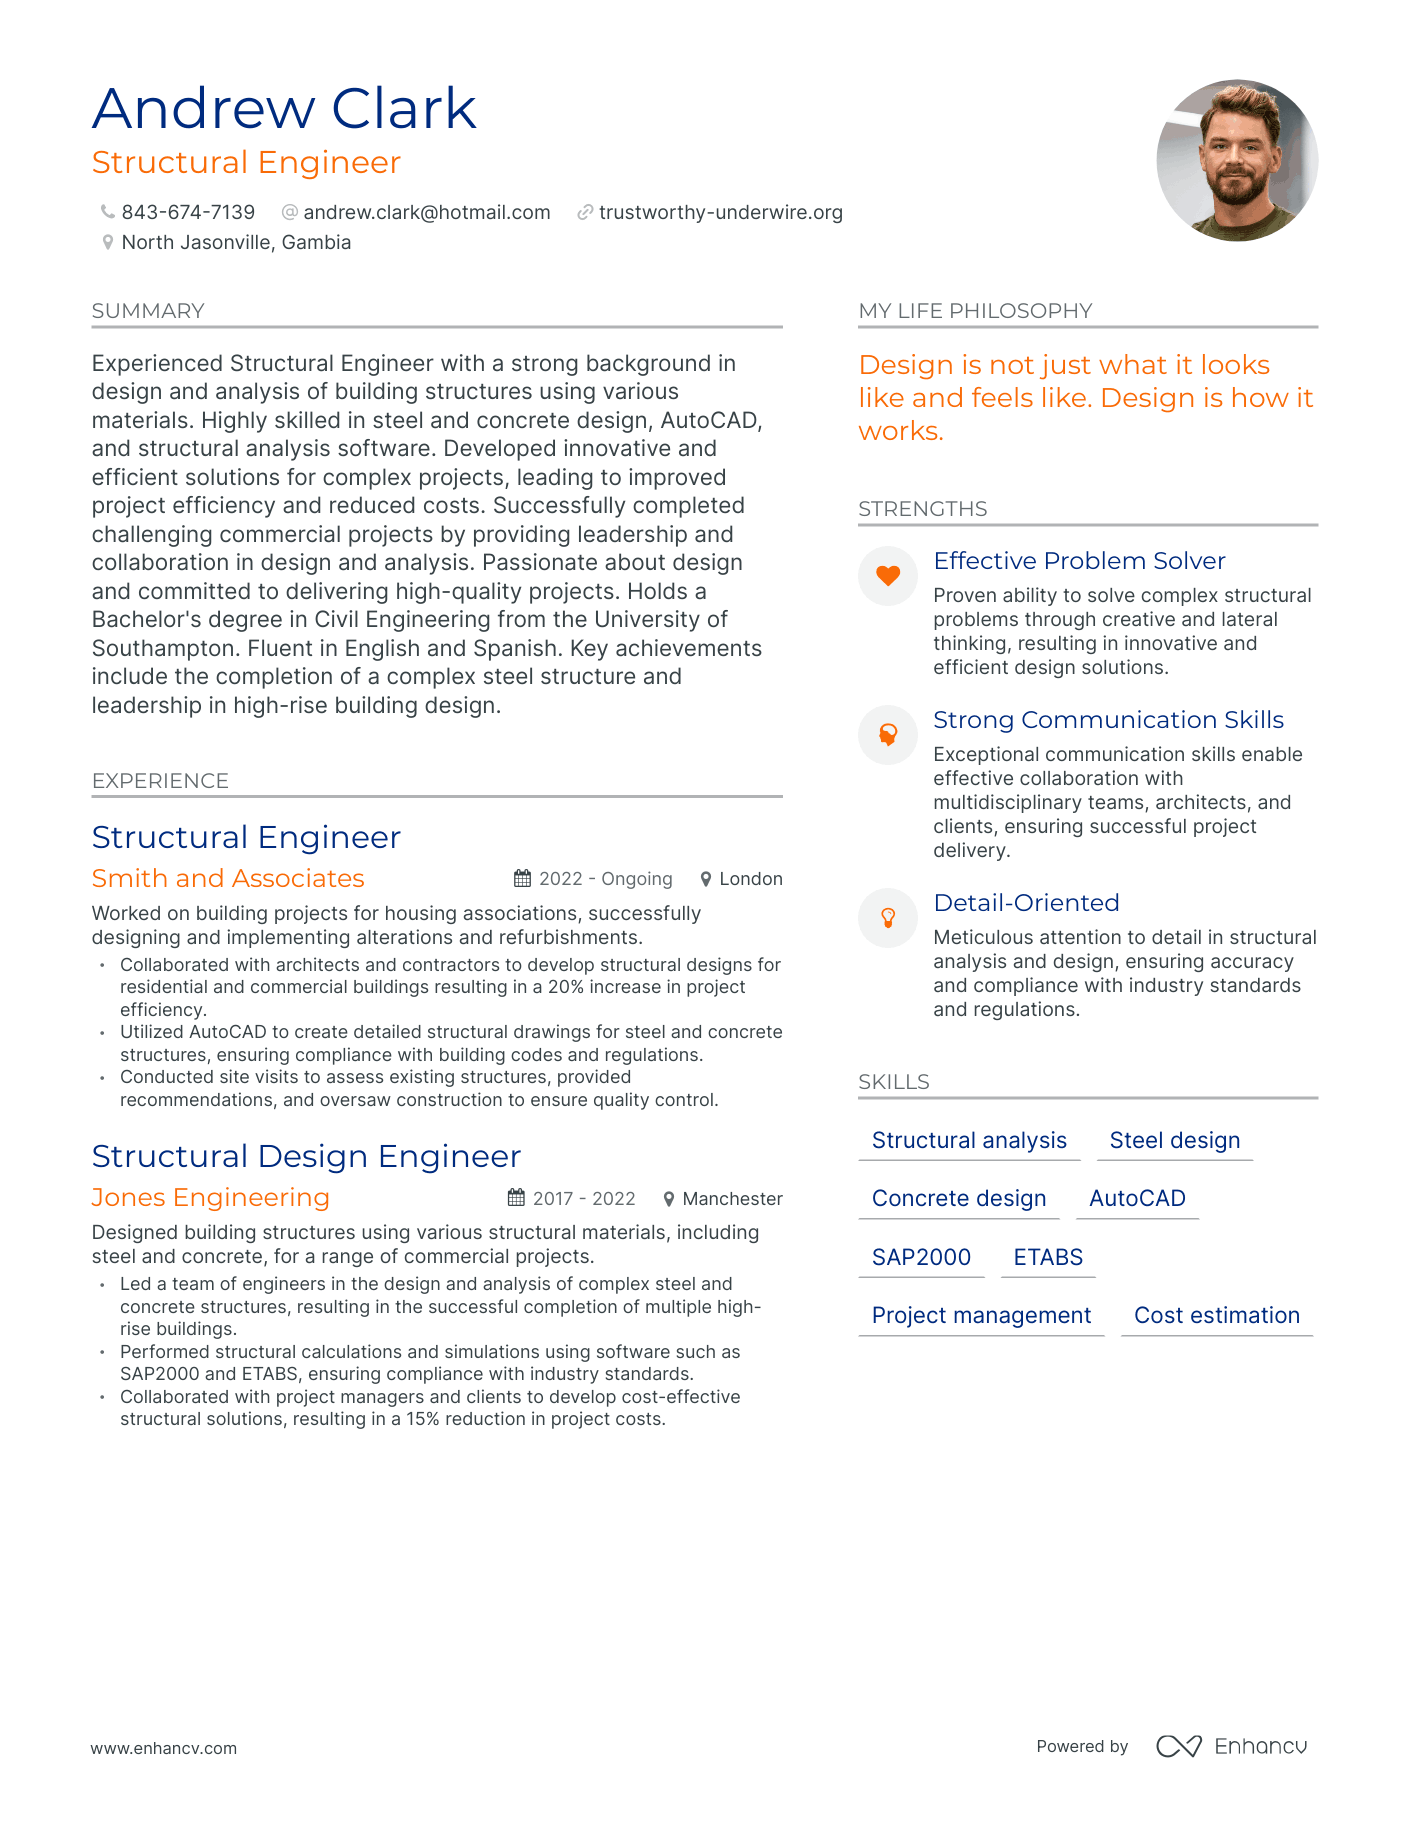 Structural Engineer resume example